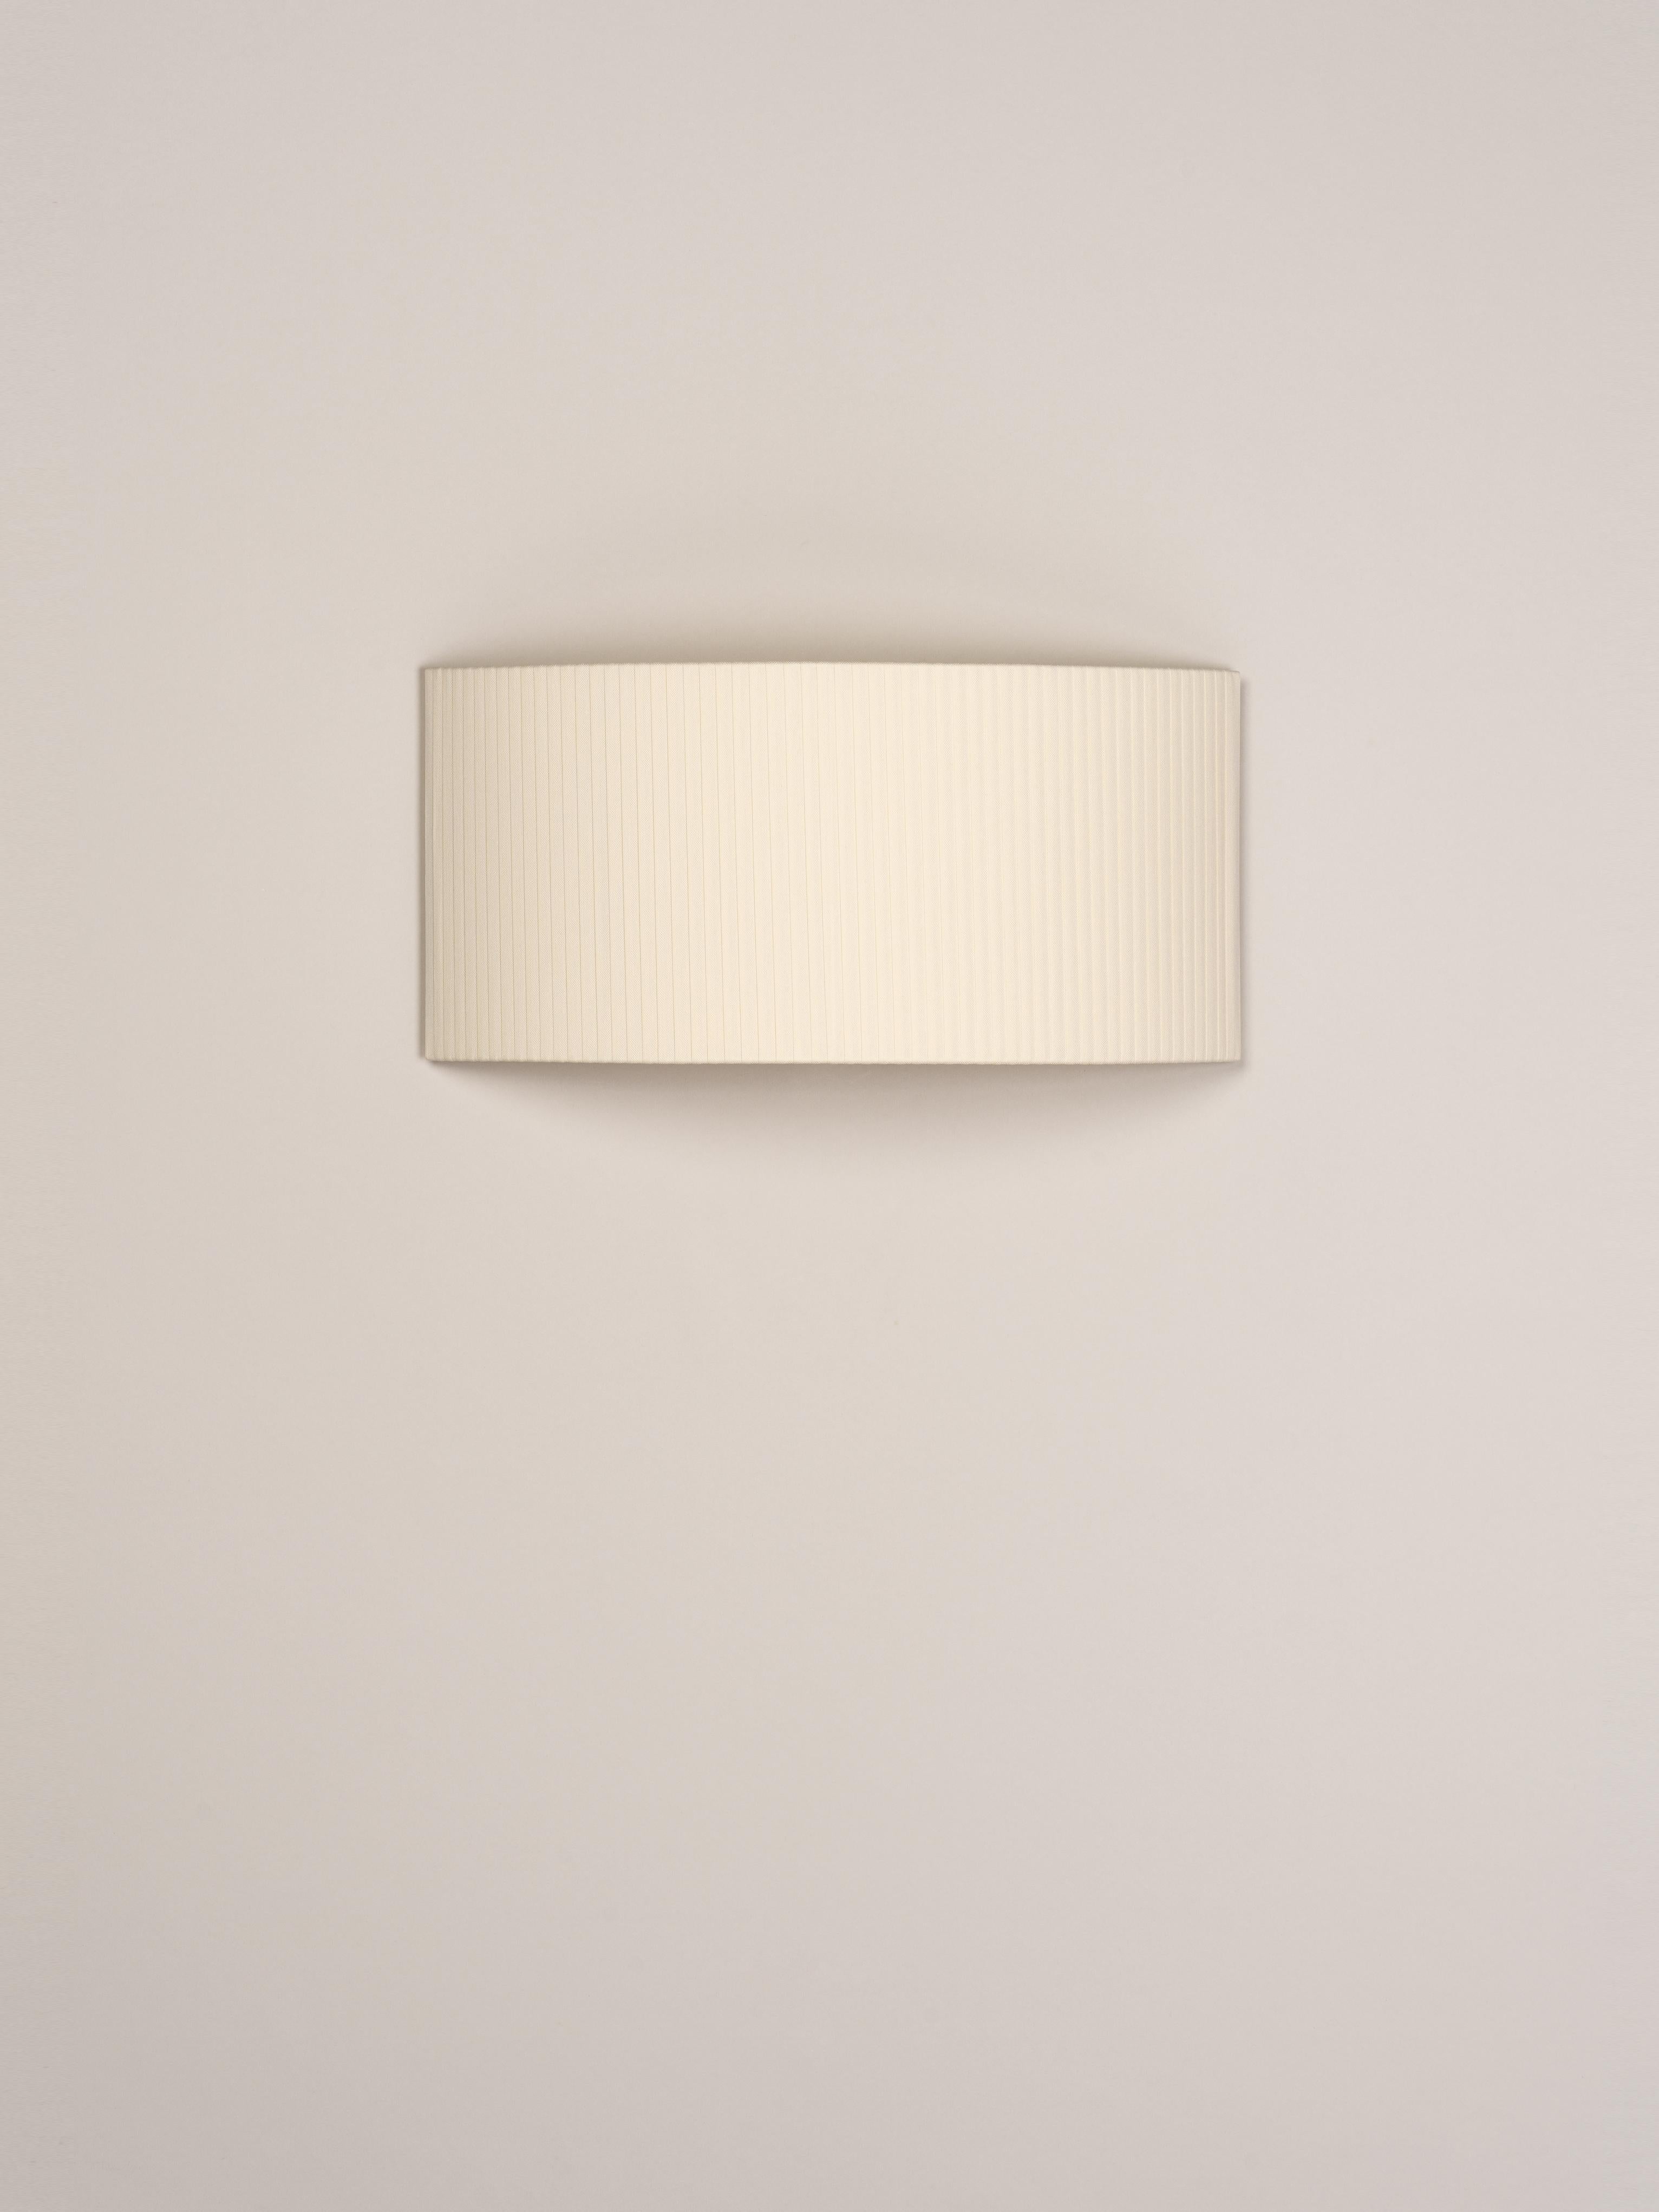 Natural Comodín Rectangular wall lamp by Santa & Cole
Dimensions: D 50 x W 13 x H 24 cm
Materials: Metal, ribbon.

This minimalist wall lamp humanises neutral spaces with its colourful and functional sobriety. The shade is fondly hand-ribboned,